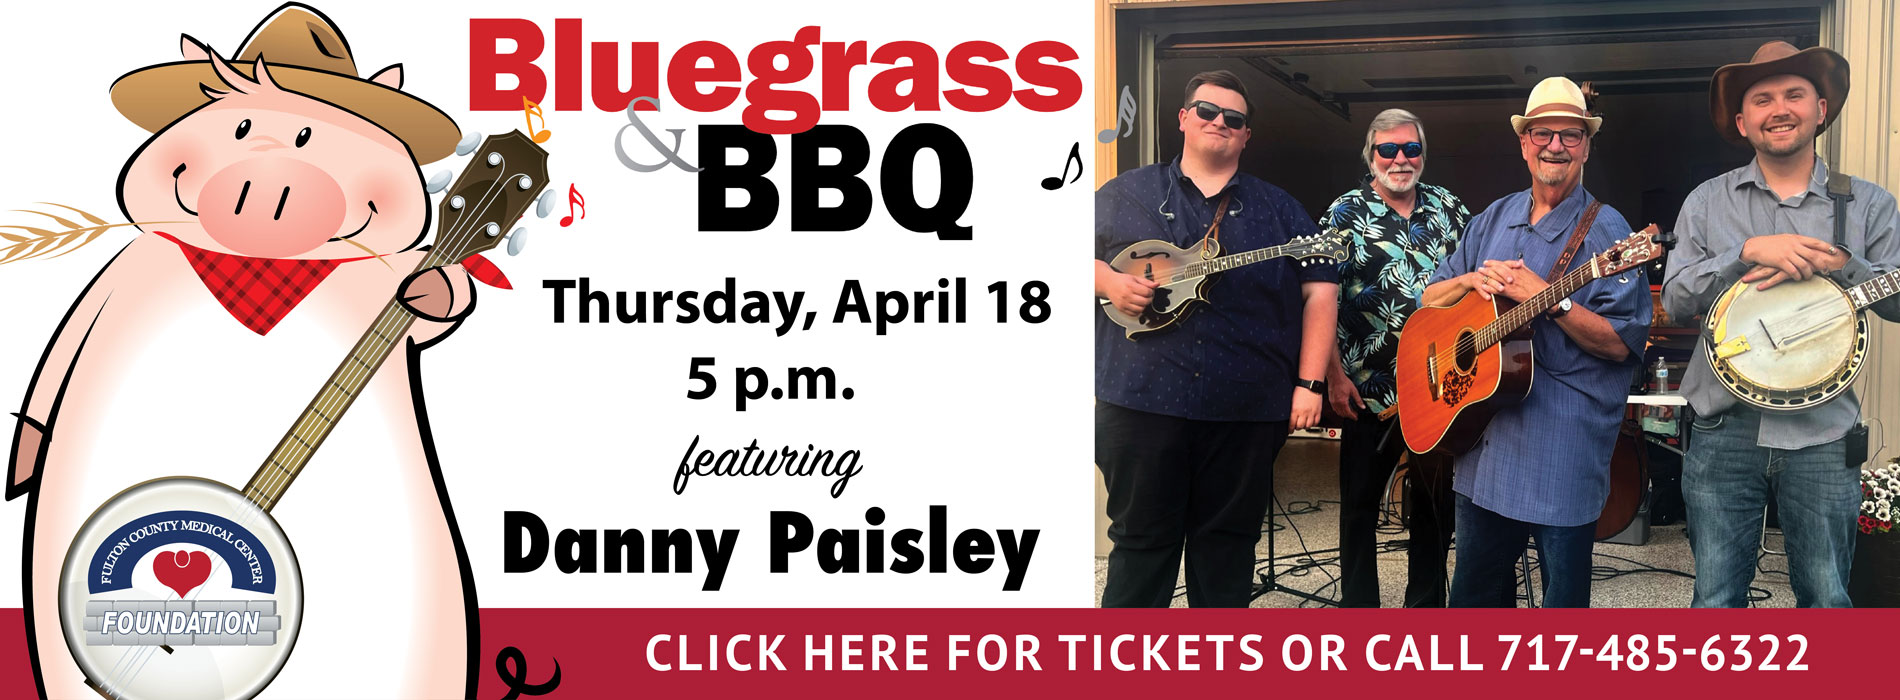 Bluegrass BBQ 

Thursday, April 18 - 5pm

Featuring Danny Paisley

Click Here for Tickets